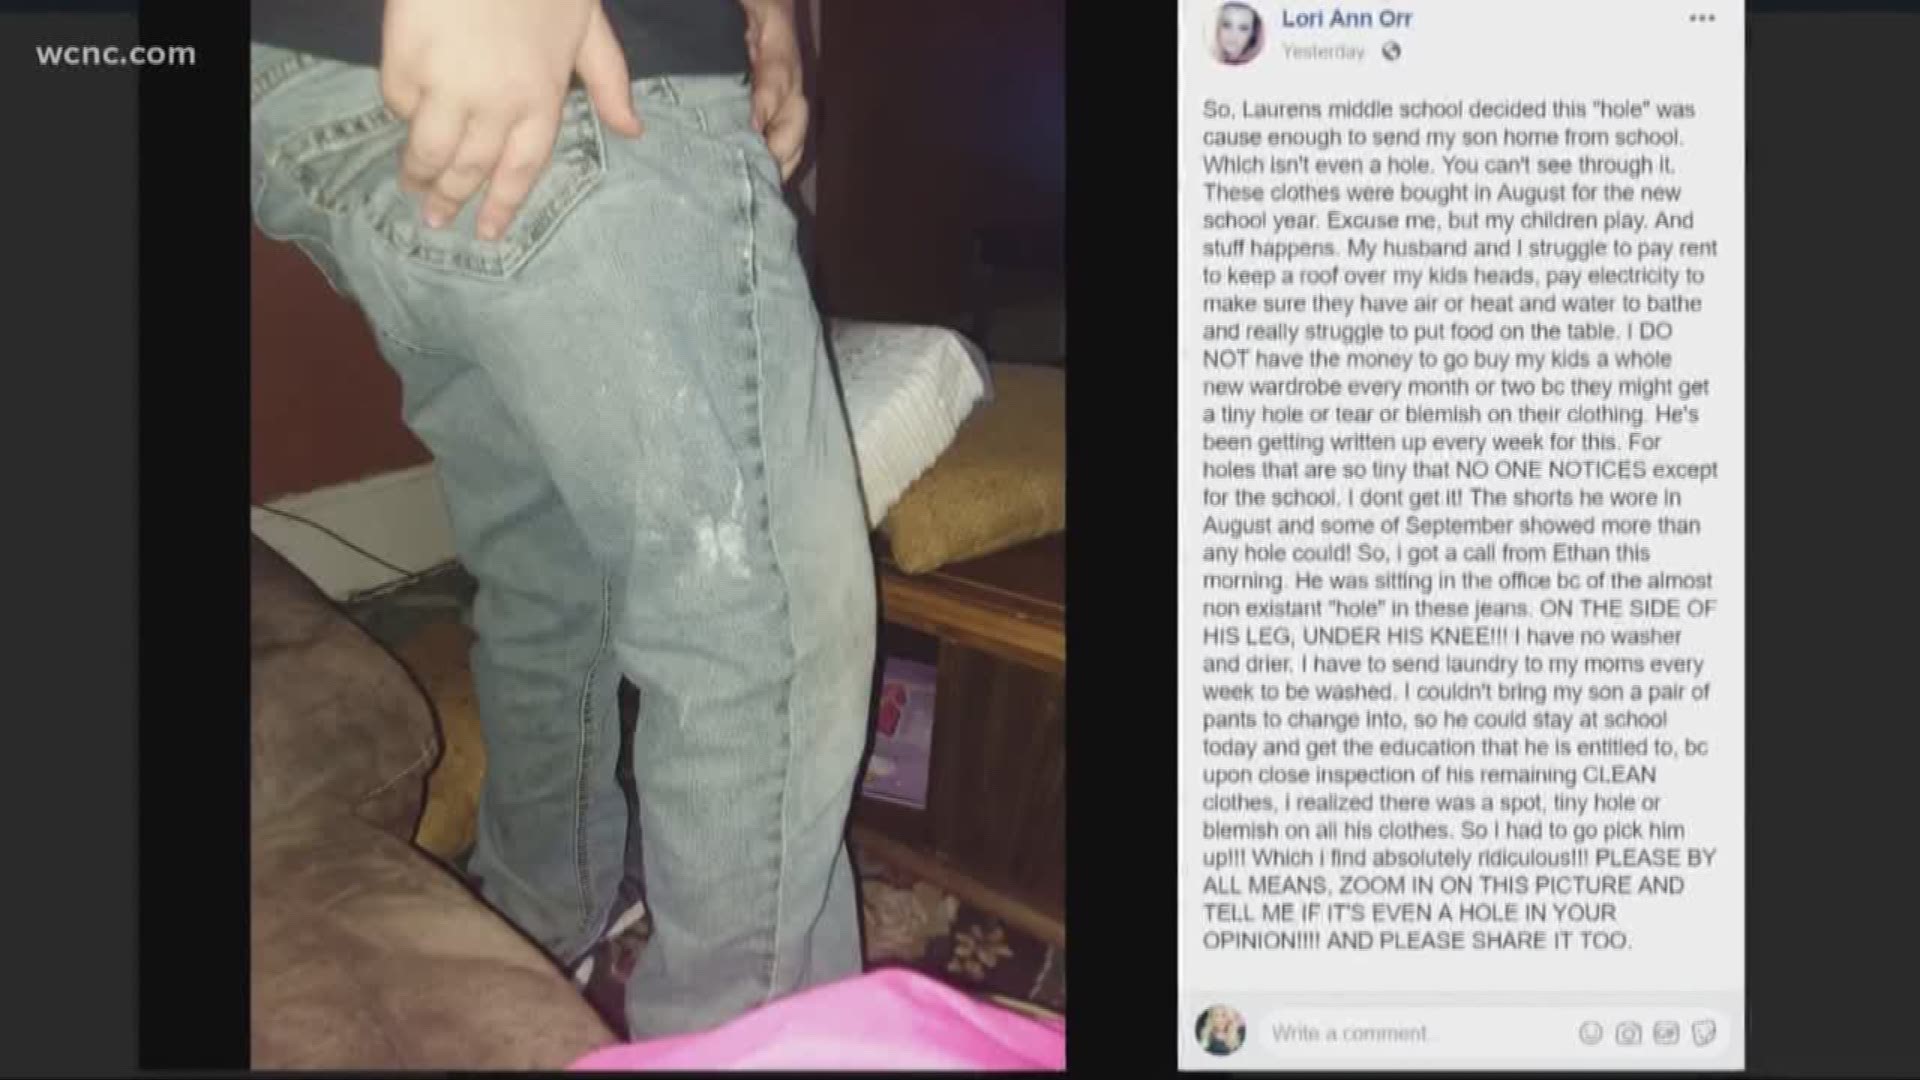 A student in South Carolina was sent home for having a "emerging hole" in his jeans. The district's dress code policy came under fire.